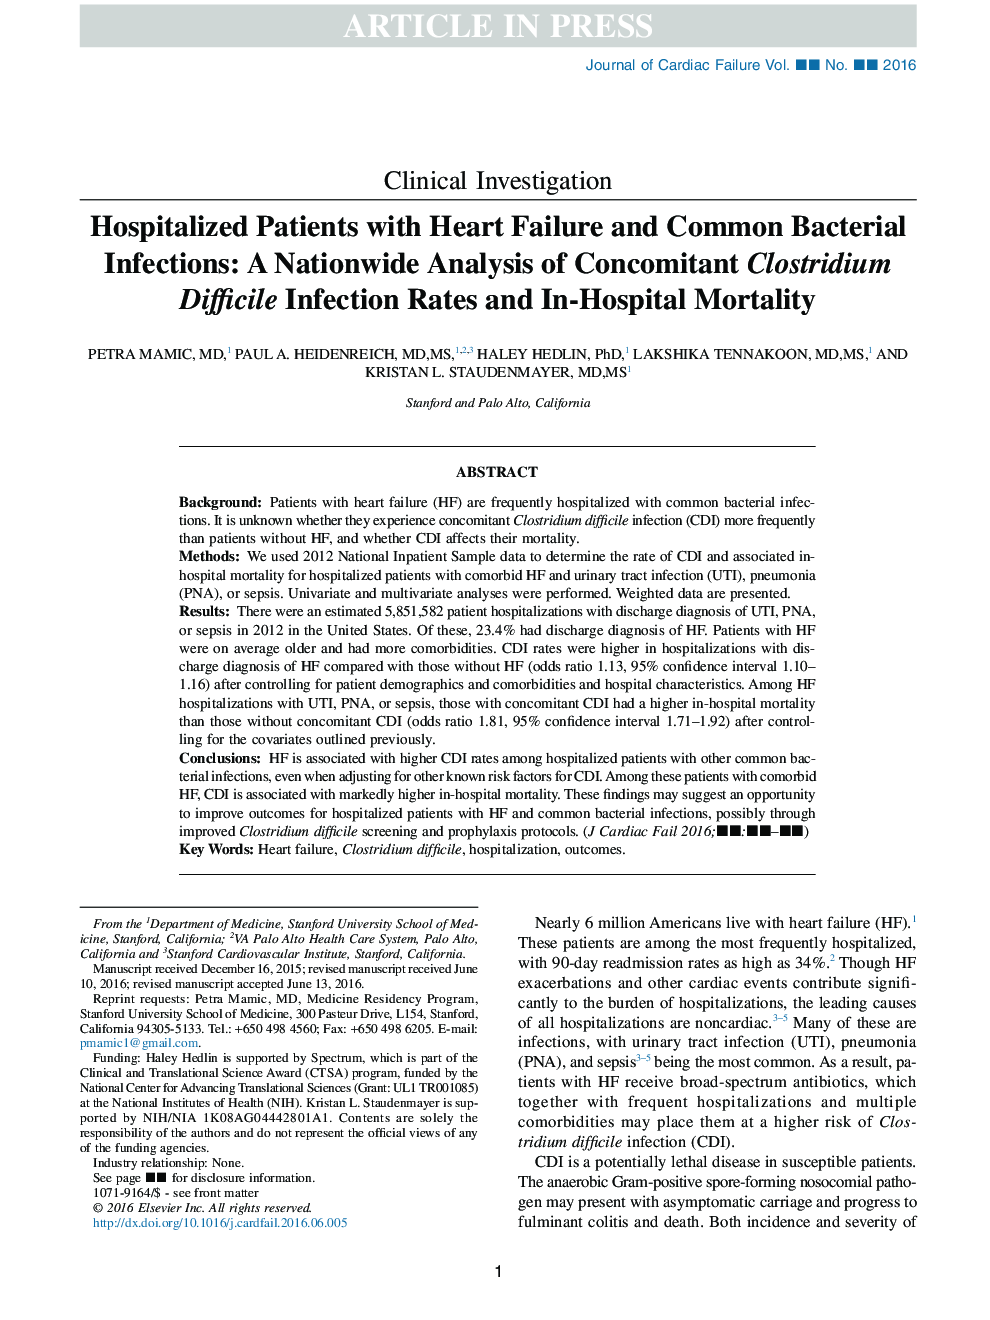 Hospitalized Patients with Heart Failure and Common Bacterial Infections: A Nationwide Analysis of Concomitant Clostridium Difficile Infection Rates and In-Hospital Mortality